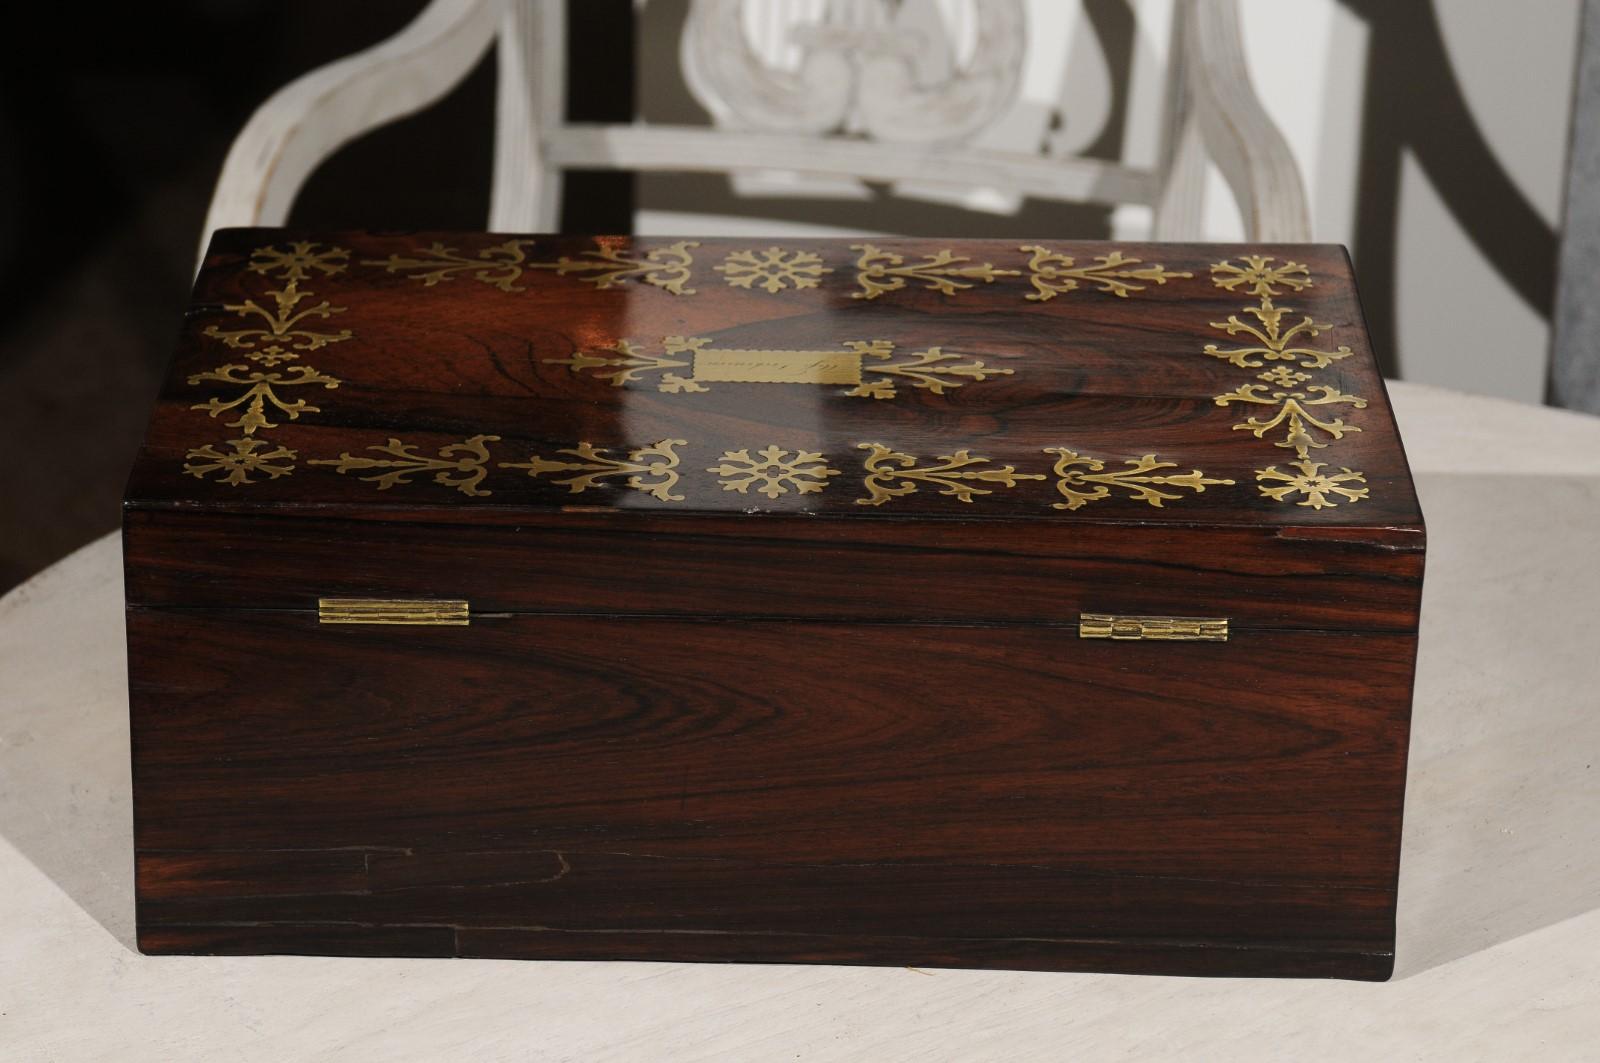 19th Century English Rosewood Box with Intricate Brass Motifs and Black Leather Writing Area